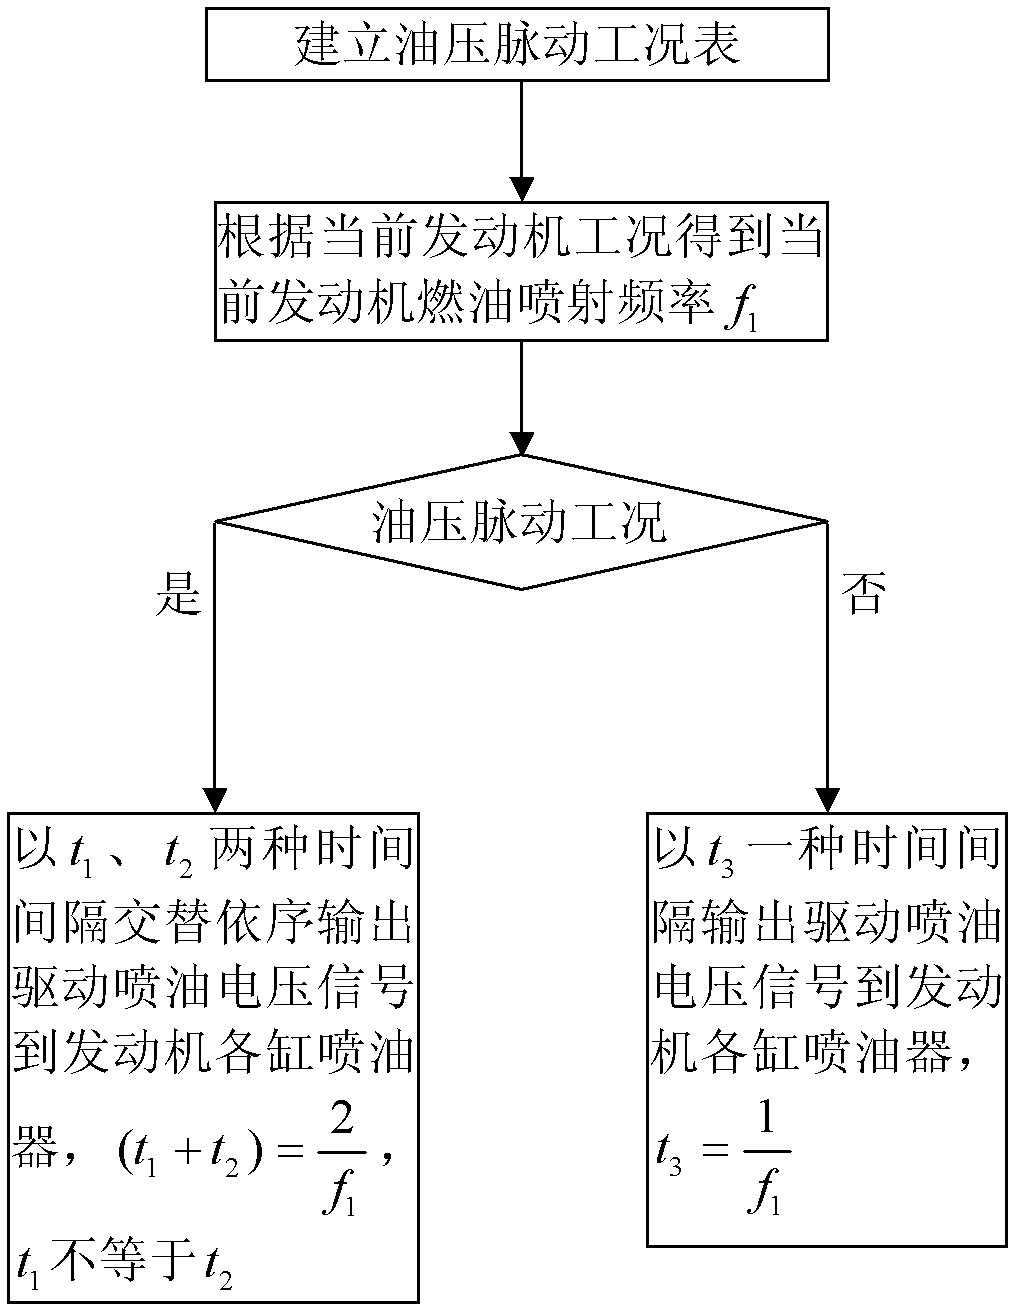 Engine fuel injection control method and engine fuel injection electronic control device